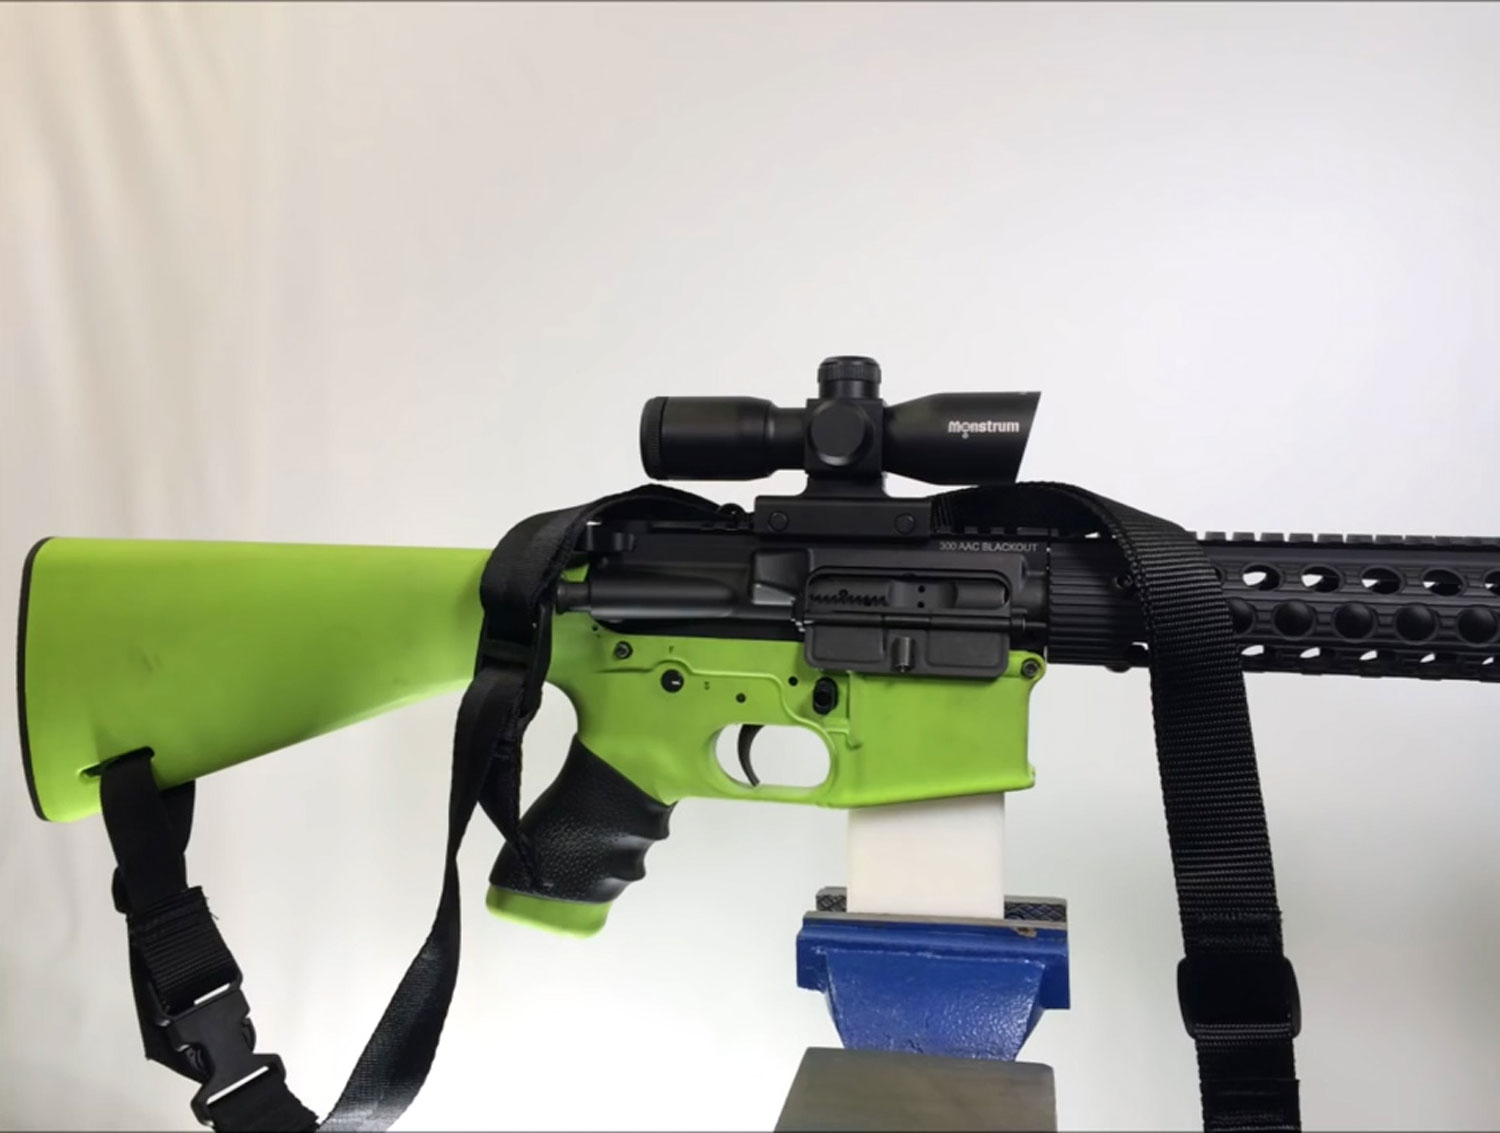 Choosing a rifle scope for your AR-15 - Prism - First Focal Plane (FFP) - Second Focal Plane (SFP)